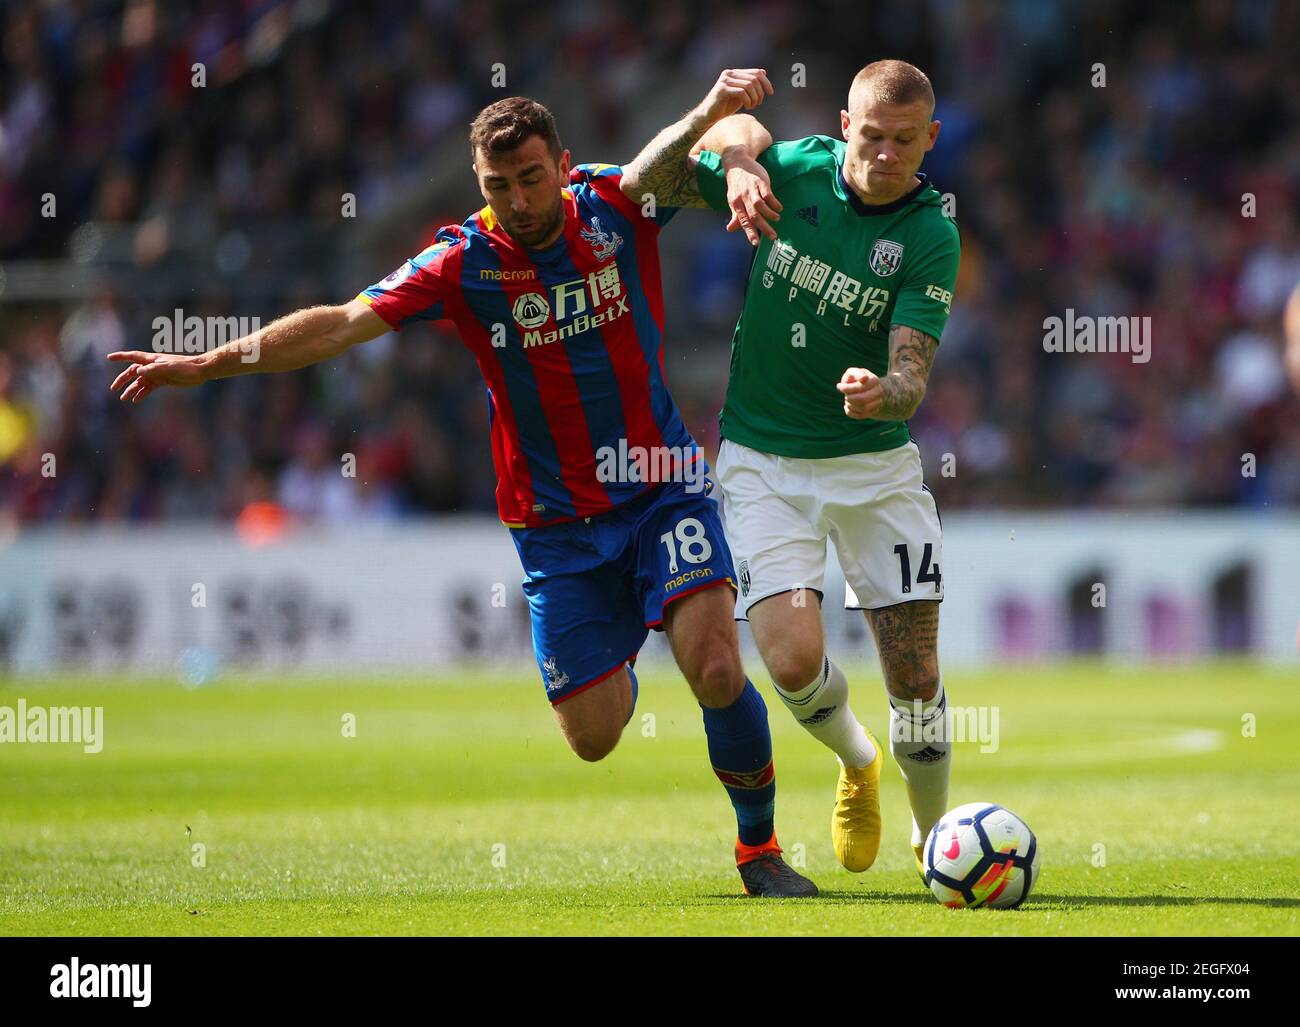 Soccer Football - Premier League - Crystal Palace vs West Bromwich Albion - Selhurst Park, London, Britain - May 13, 2018   Crystal Palace's James McArthur in action with West Bromwich Albion's James McClean    REUTERS/Hannah McKay    EDITORIAL USE ONLY. No use with unauthorized audio, video, data, fixture lists, club/league logos or "live" services. Online in-match use limited to 75 images, no video emulation. No use in betting, games or single club/league/player publications.  Please contact your account representative for further details. Stock Photo